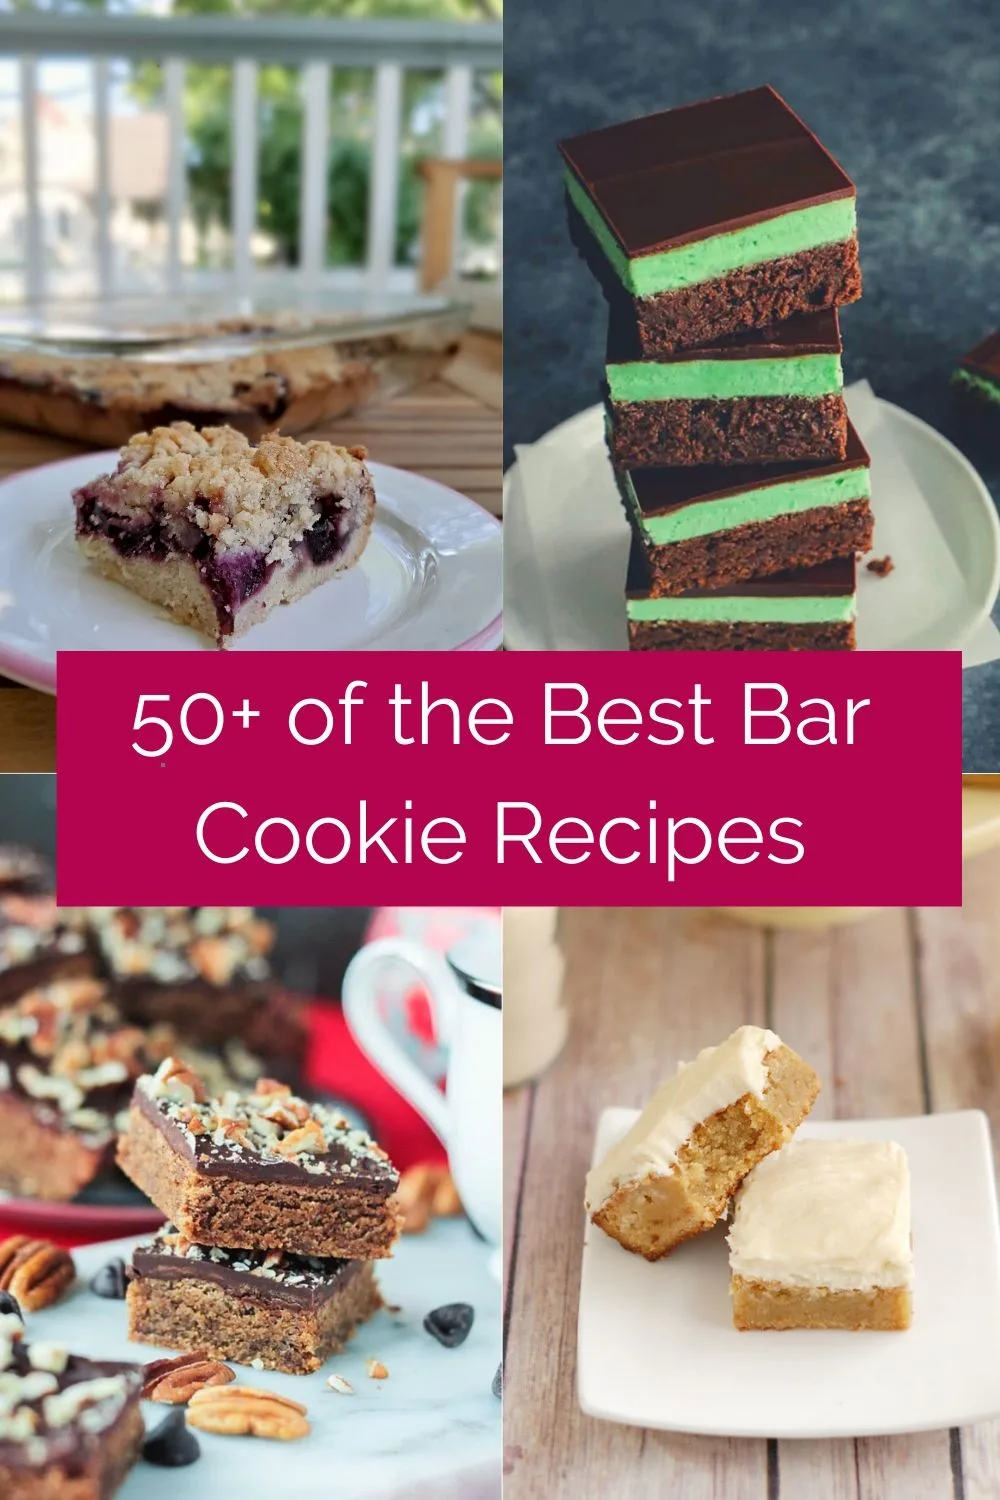 More than 50 bar cookie recipes